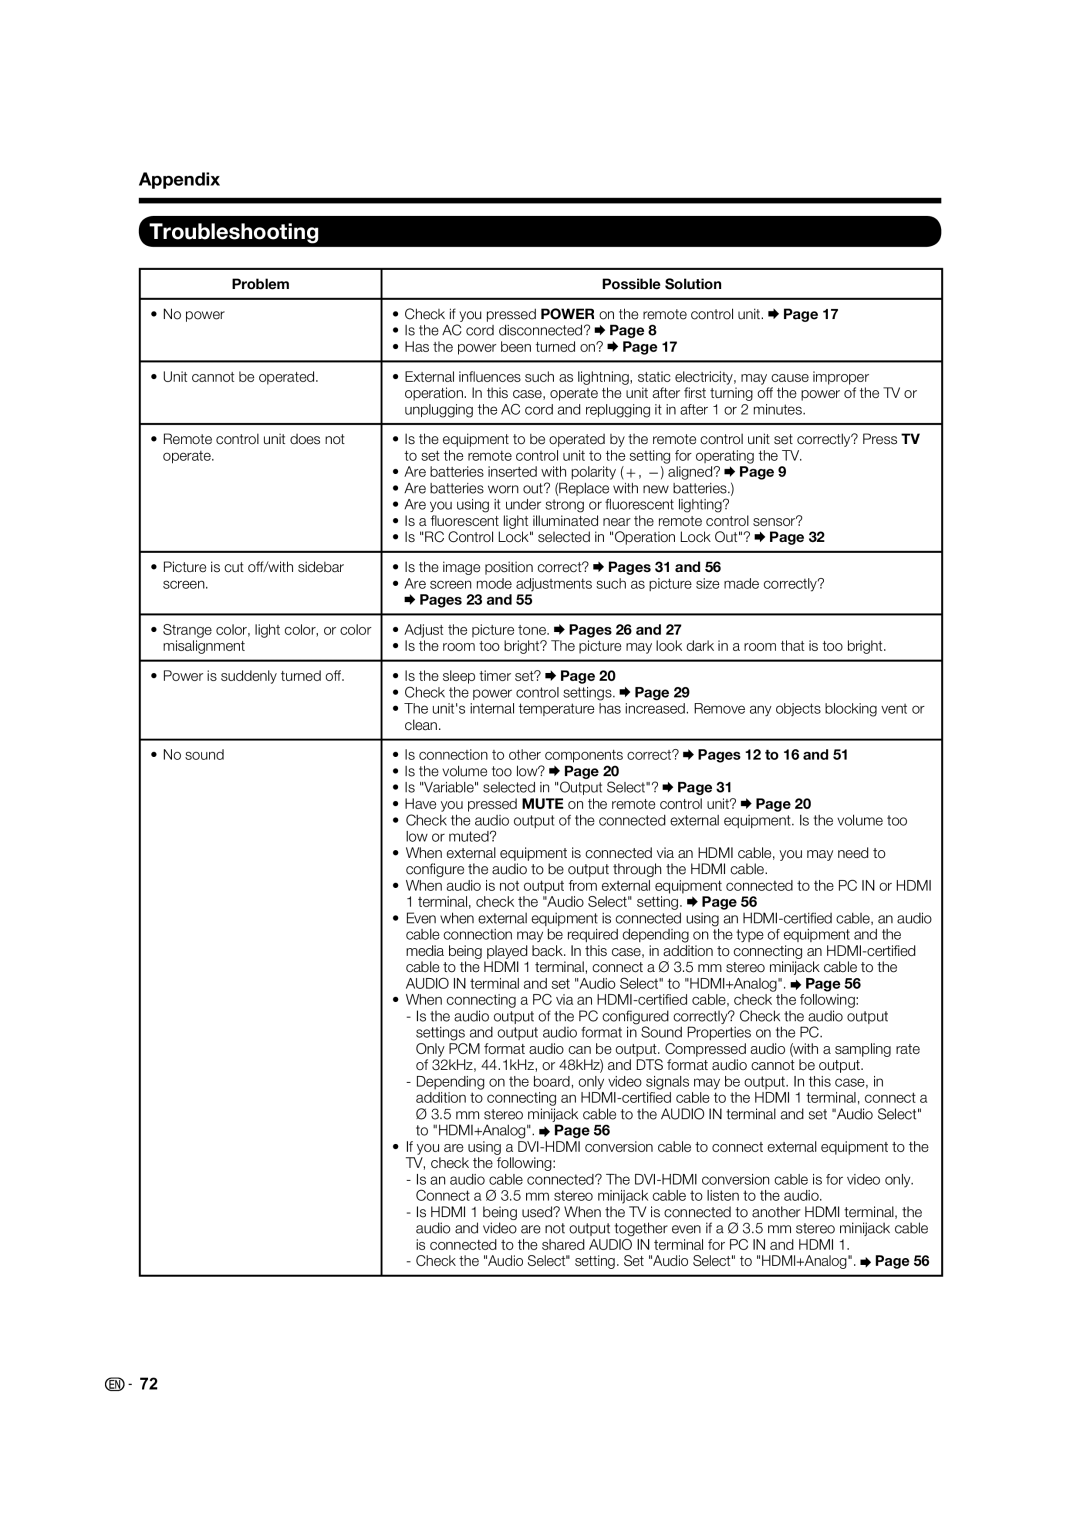 Sharp LC-70LE734U Troubleshooting, Appendix, Problem, Possible Solution, No power, Pages 23 and, Pages 26 and 